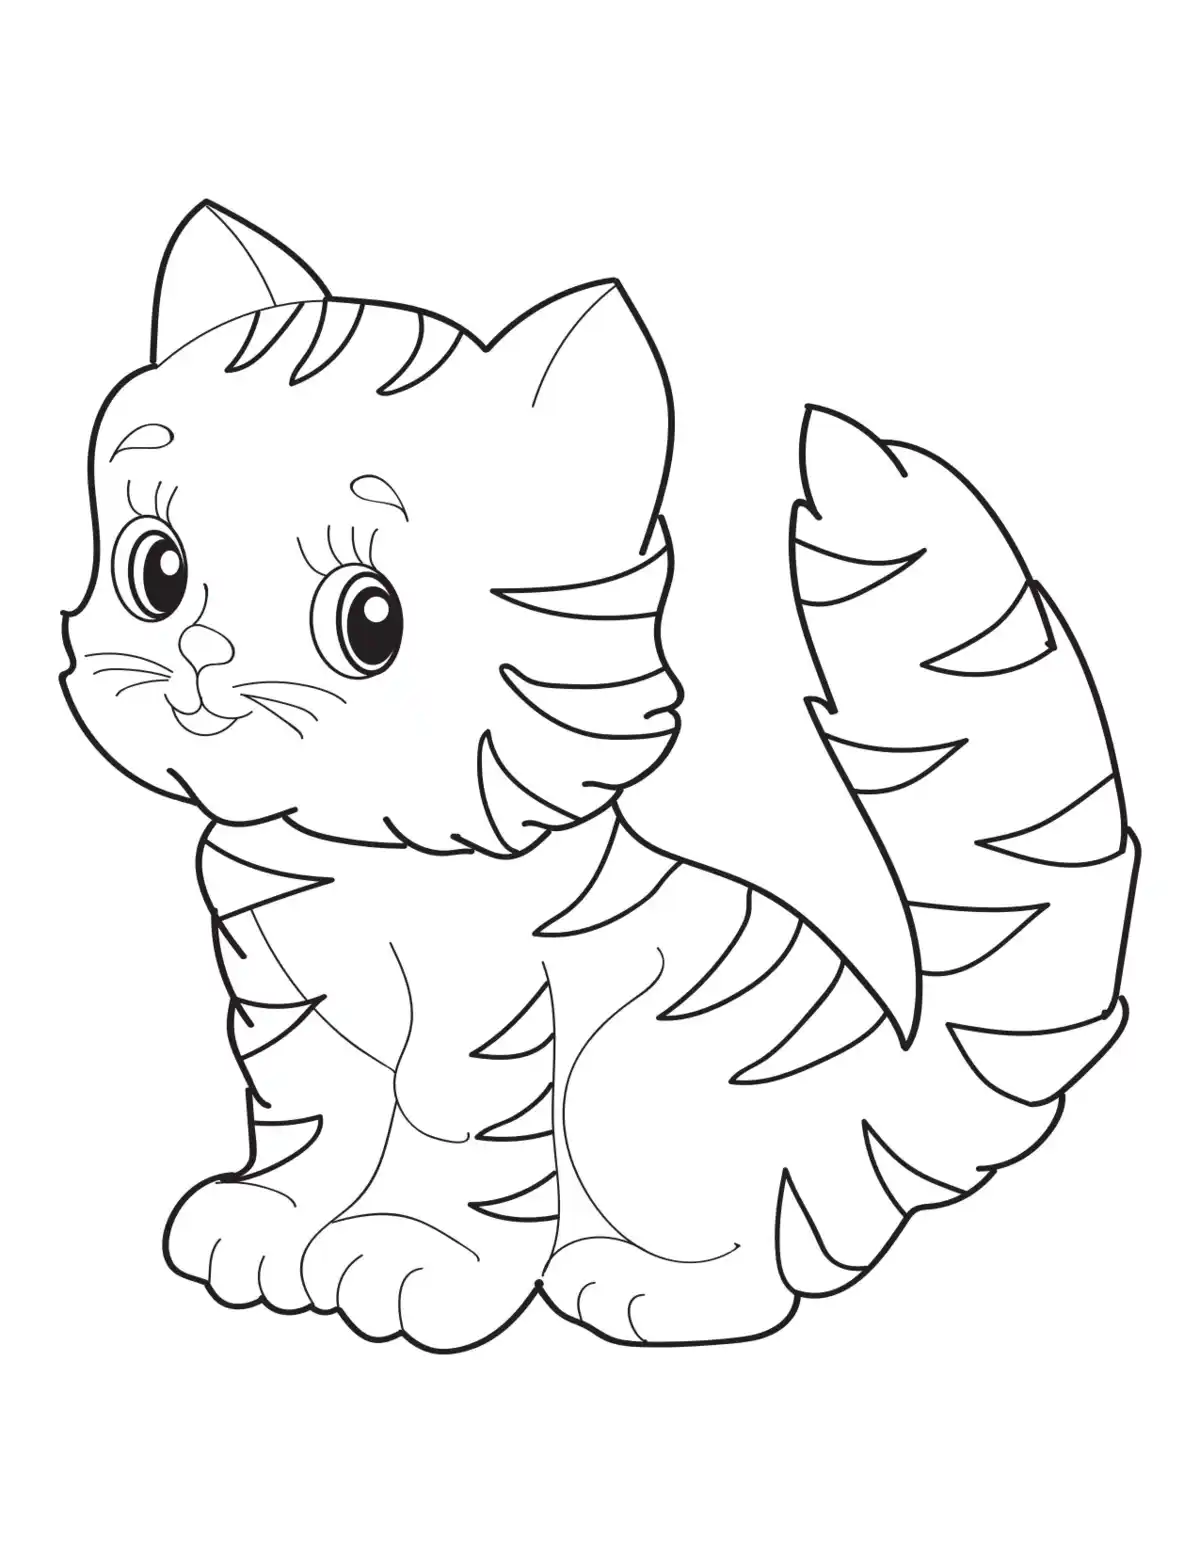 Free Coloring Pages PDF, Cute Striped Kitten Simple Cat Coloring Pages Pdf